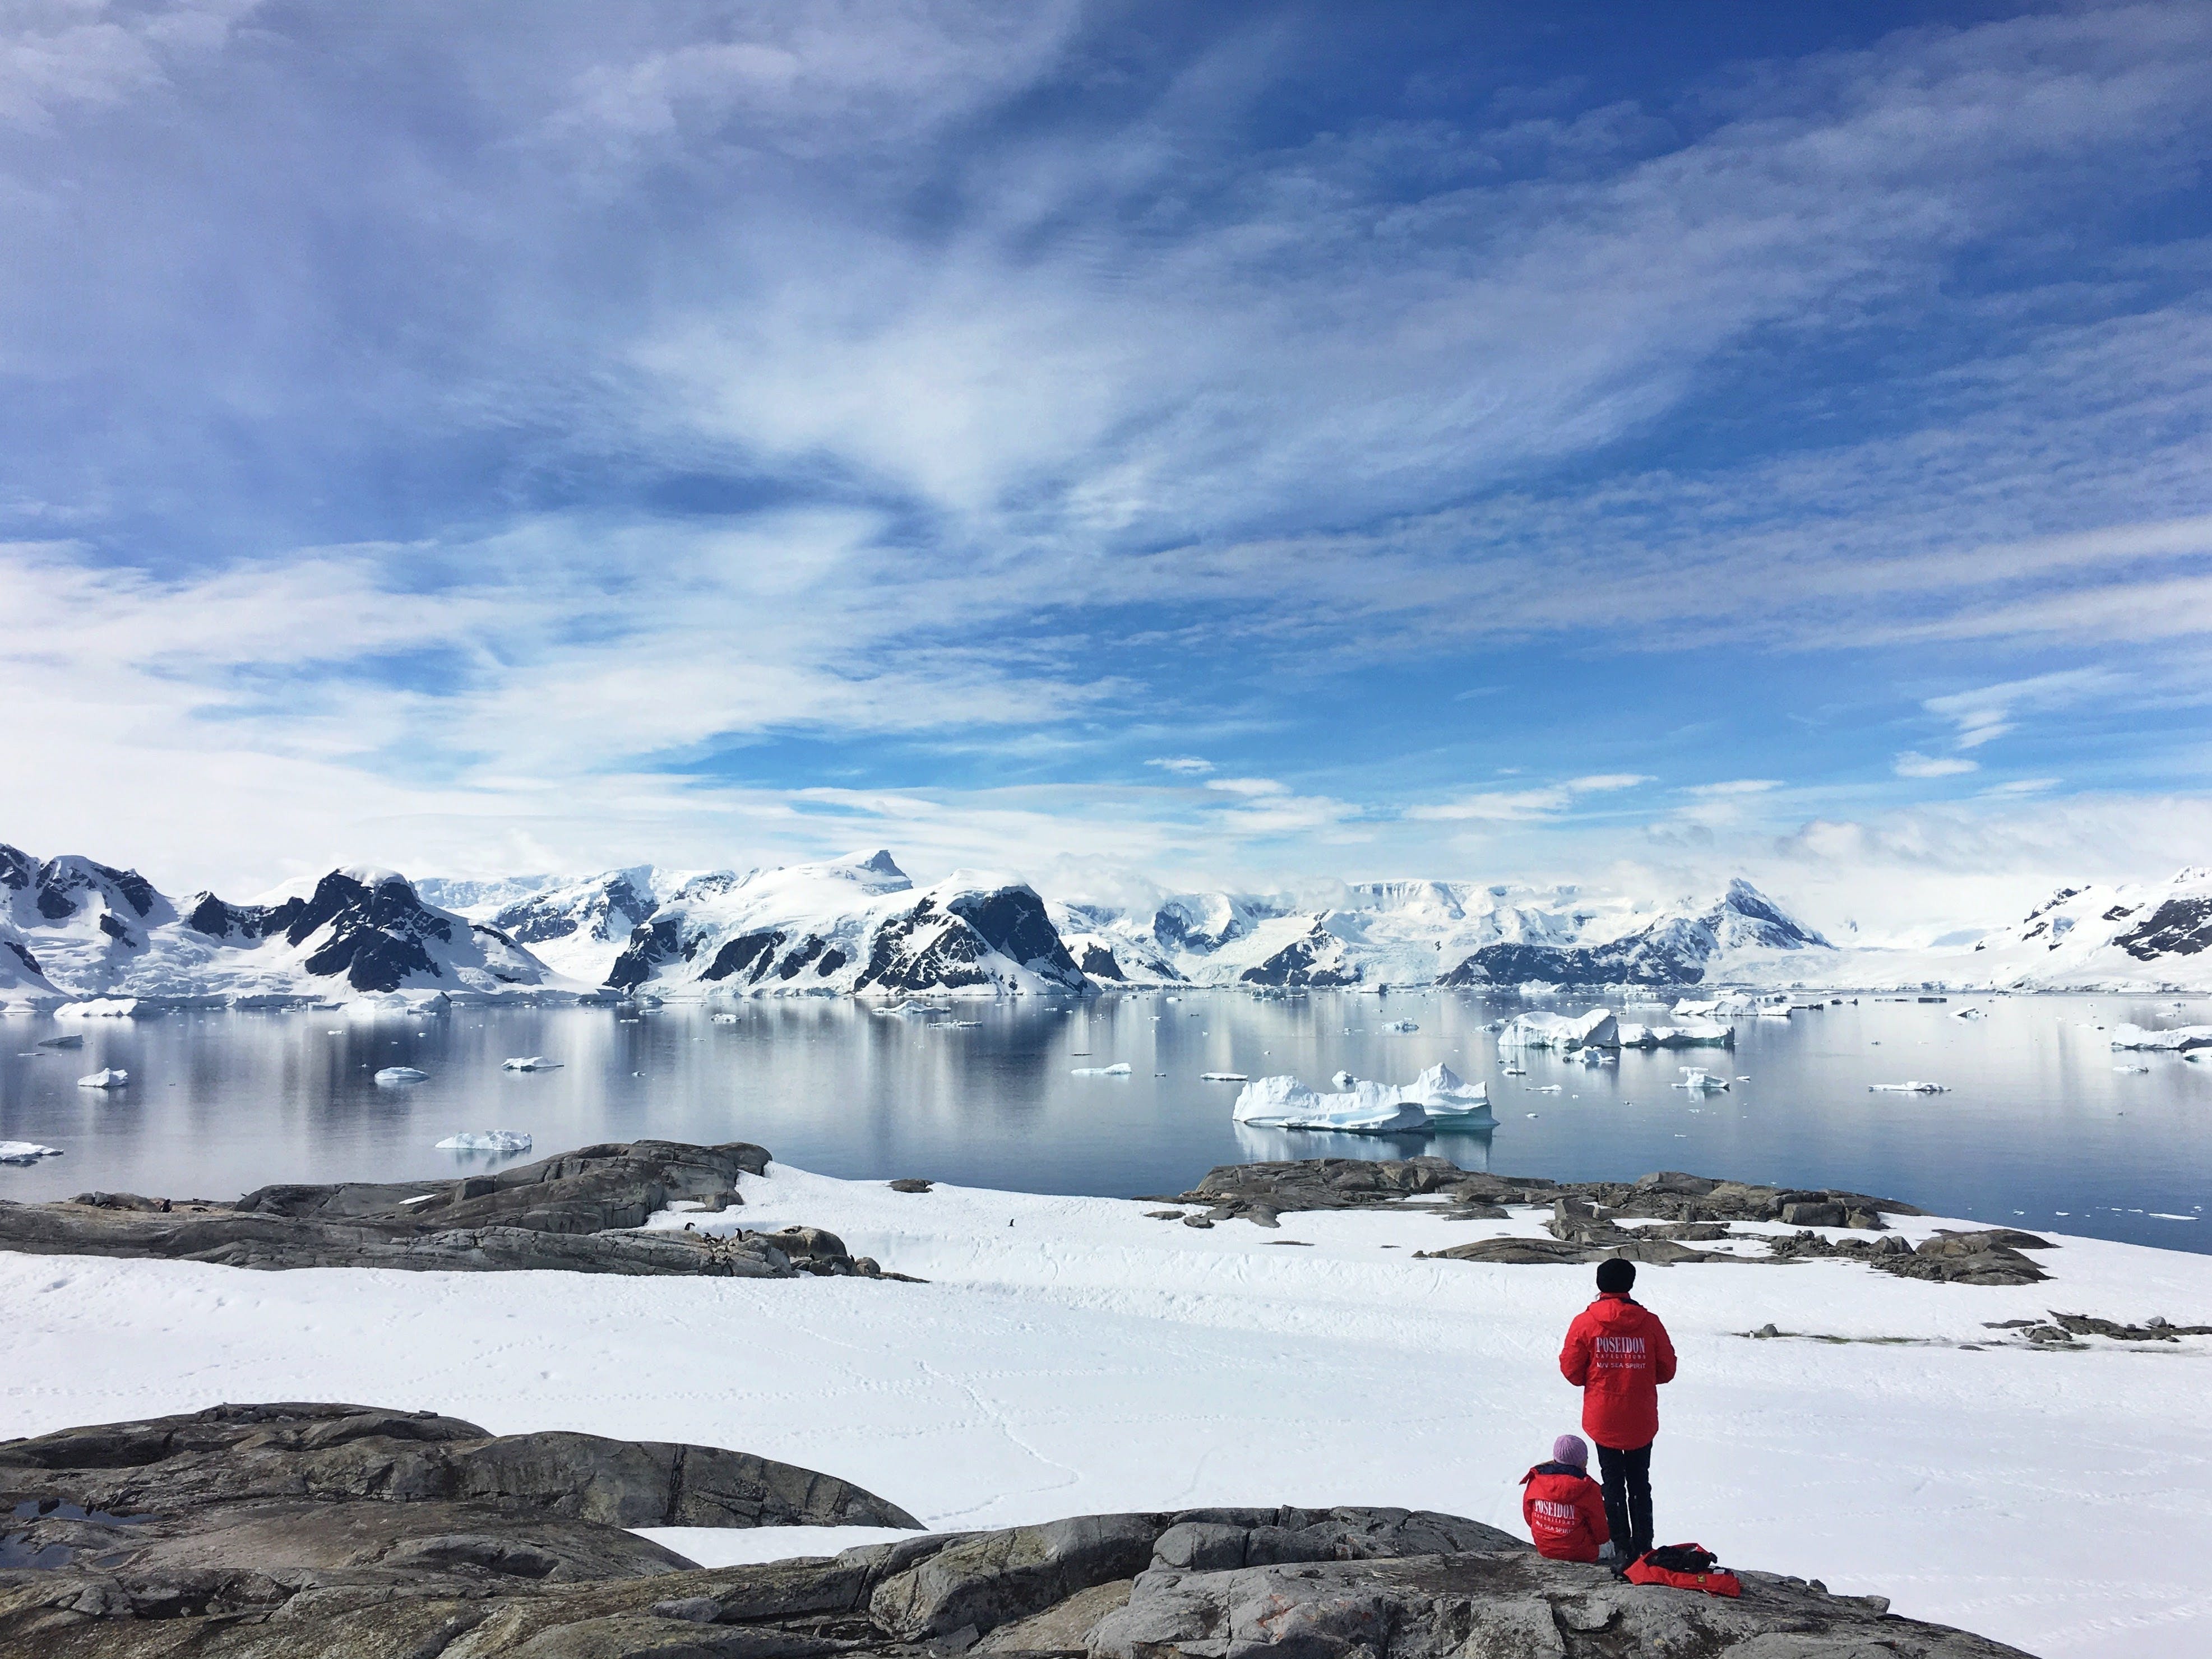 Antarctica is truly one of Earth's bucket-list destinations.